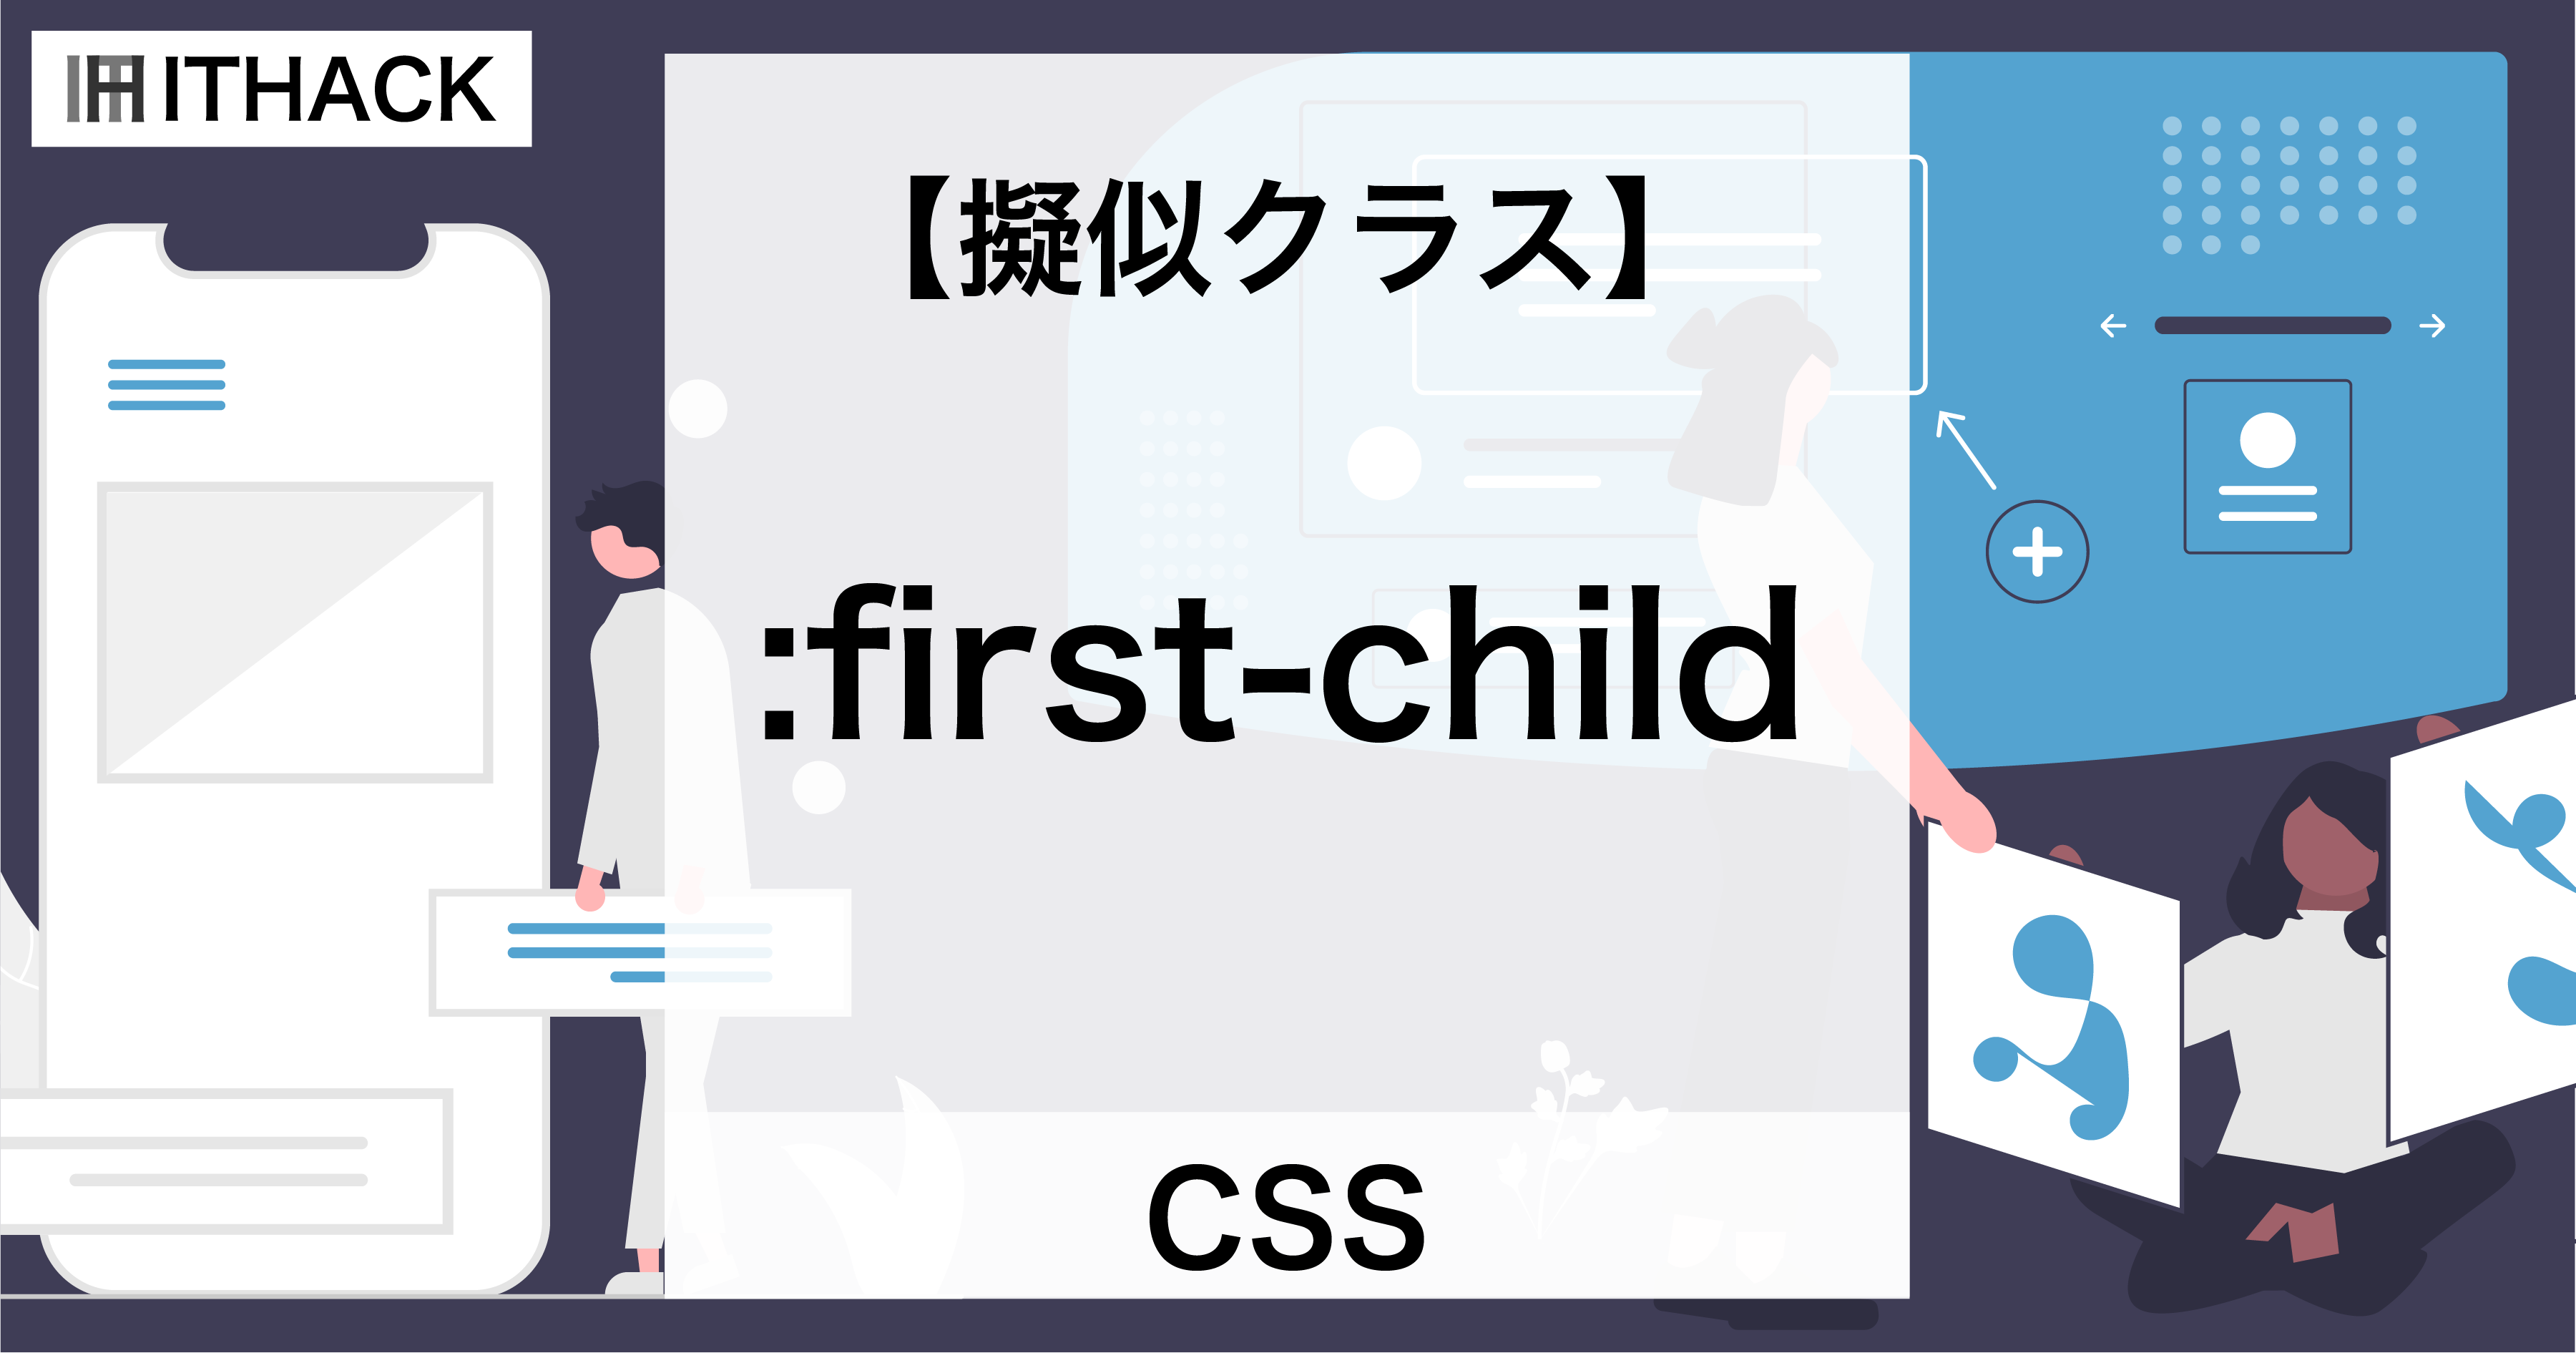 【CSS】:first-child（擬似クラス） - 最初の要素